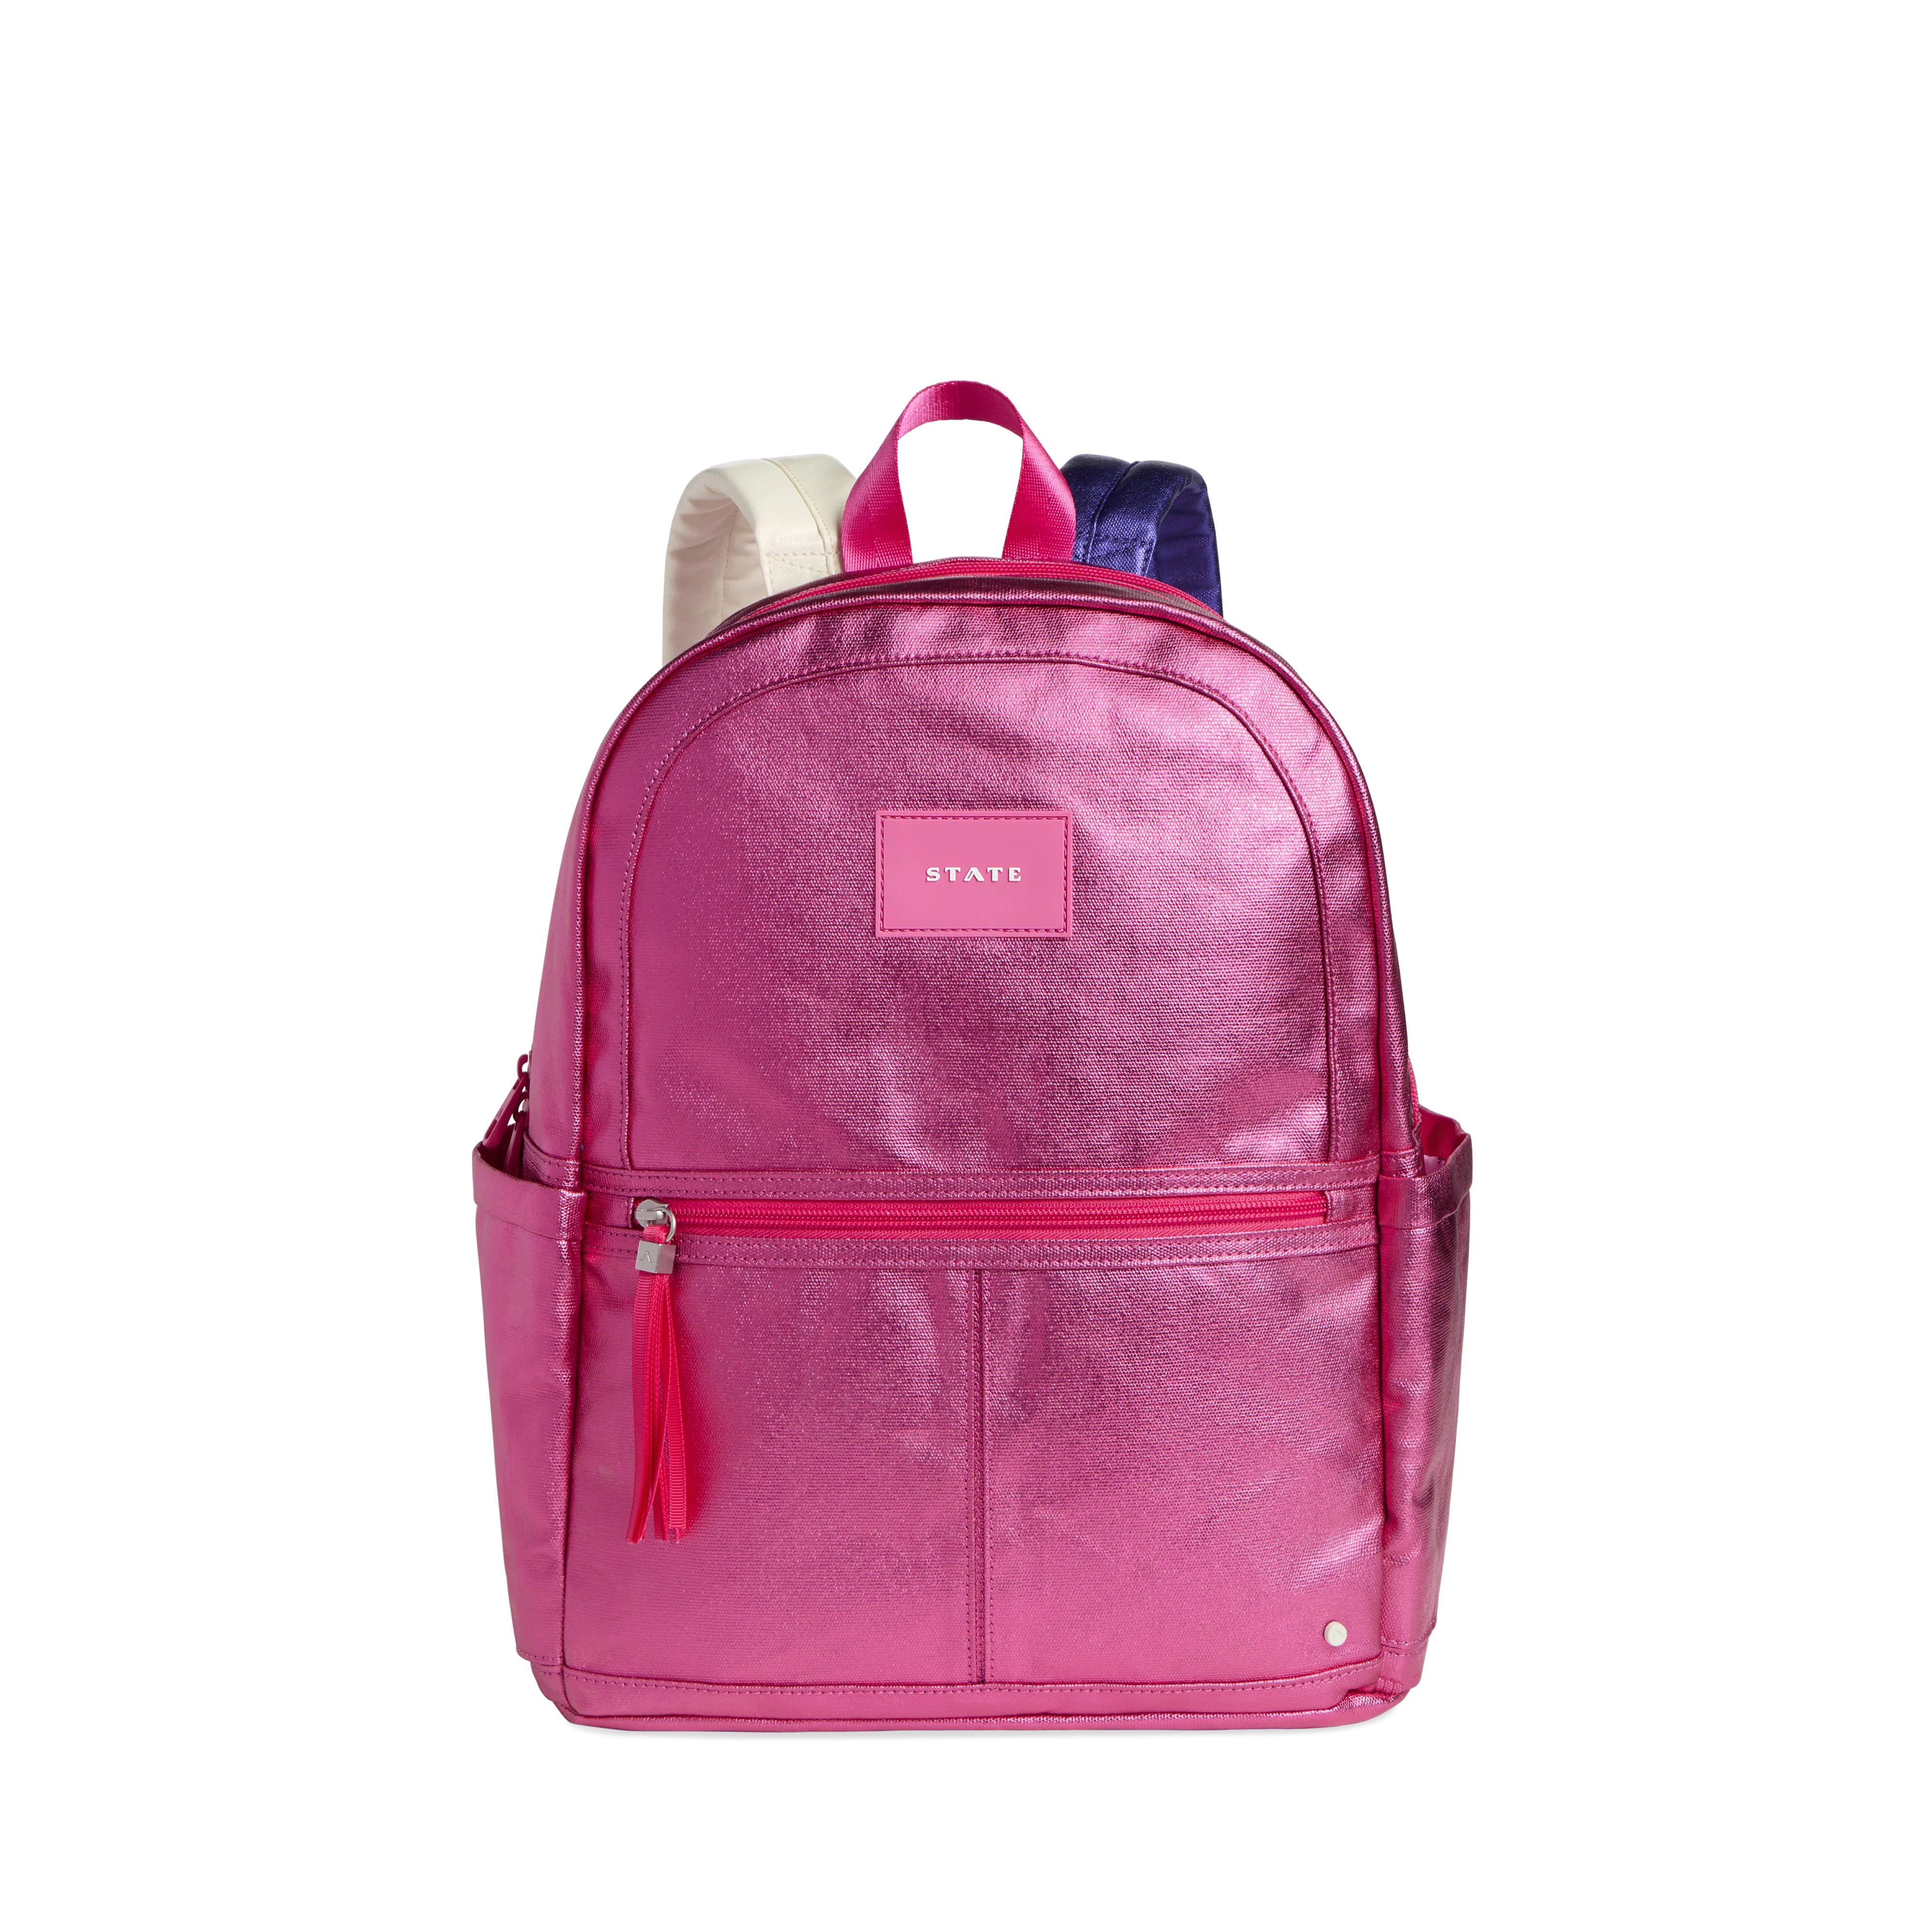 STATE Bags | Kane Kids Double Pocket Backpack Metallic Hot Pink Multi | STATE Bags